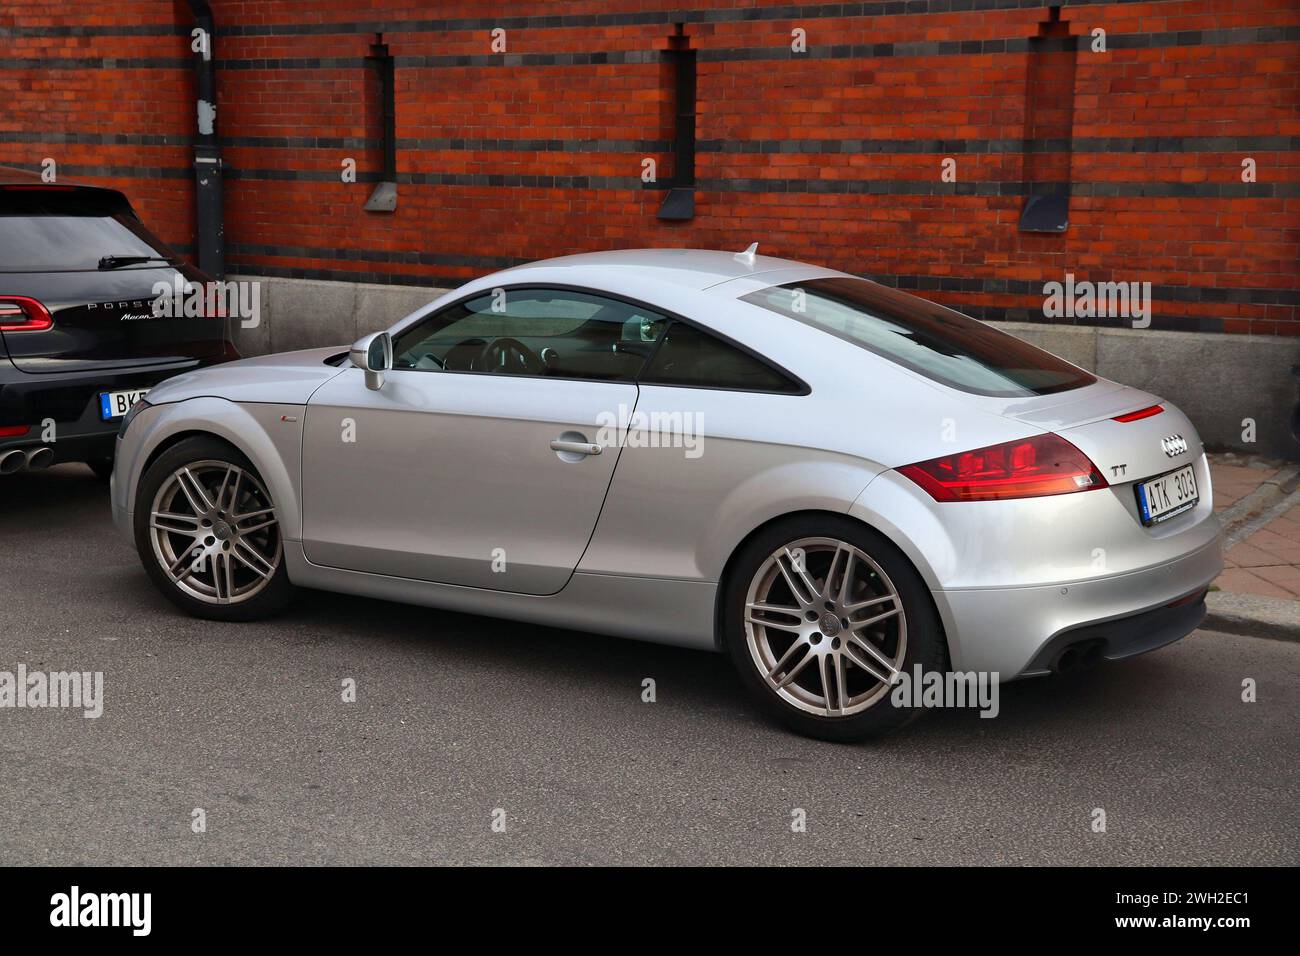 STOCKHOLM, SWEDEN - AUGUST 24, 2018: Silver Audi TT sports coupe car parked in Stockholm, Sweden. There are 4.8 million passenger cars registered in S Stock Photo